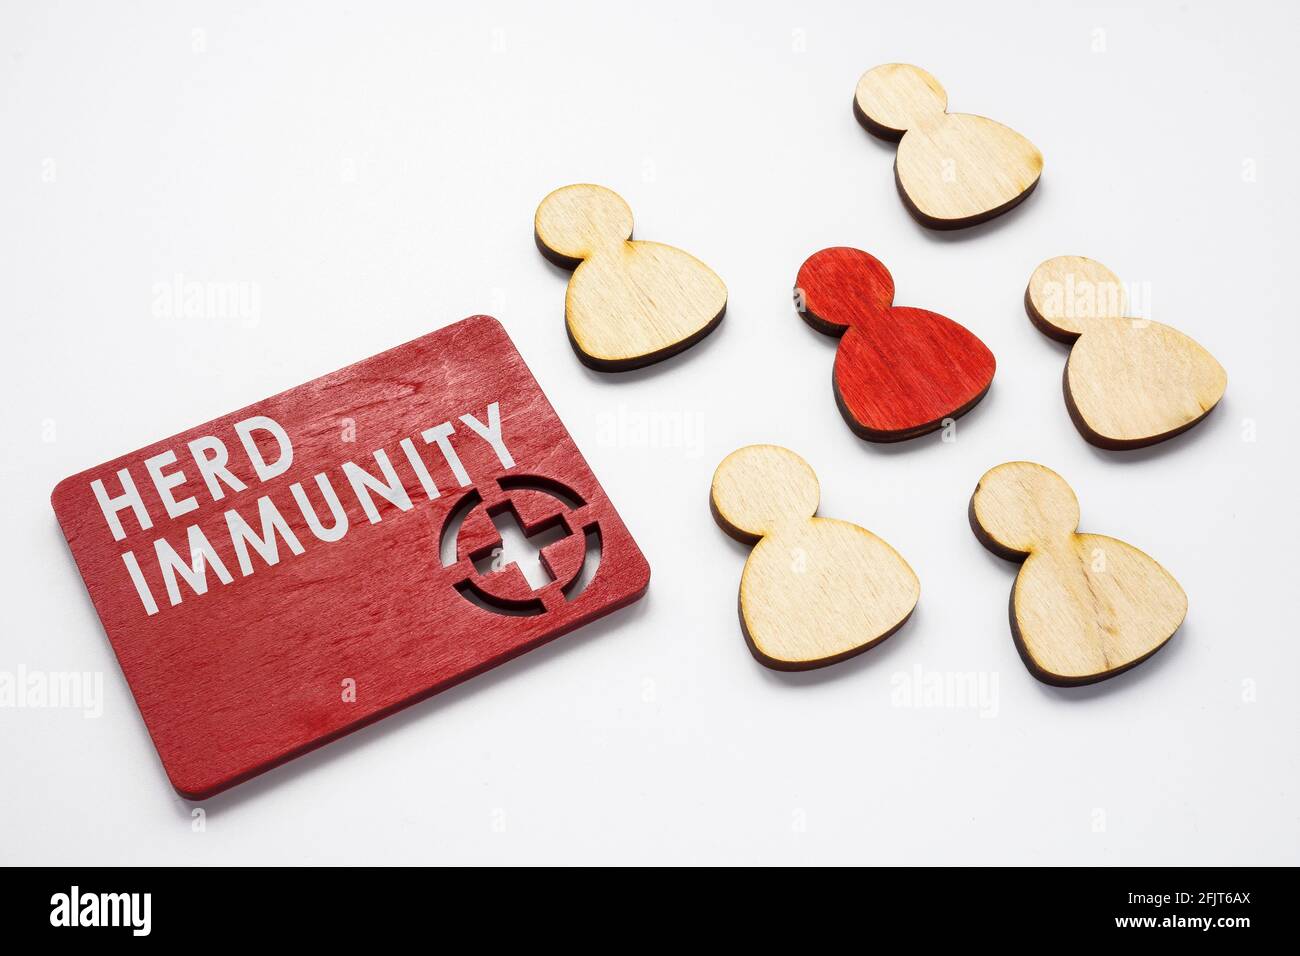 Herd immunity concept. Red plate with figurines. Stock Photo